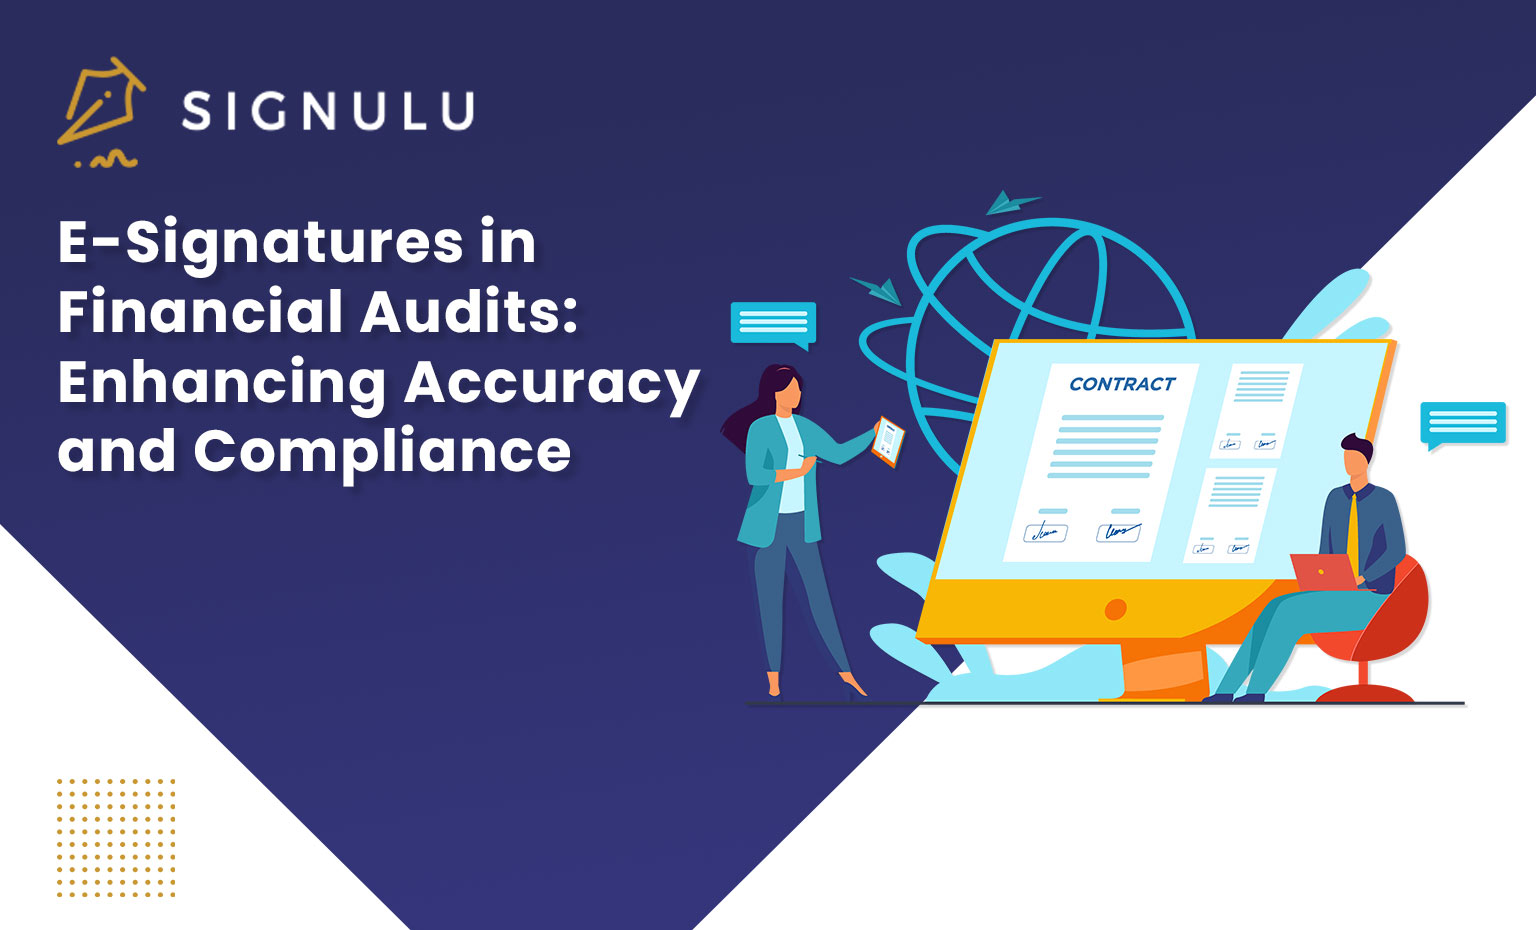 E-Signatures in Financial Audits: Enhancing Accuracy and Compliance